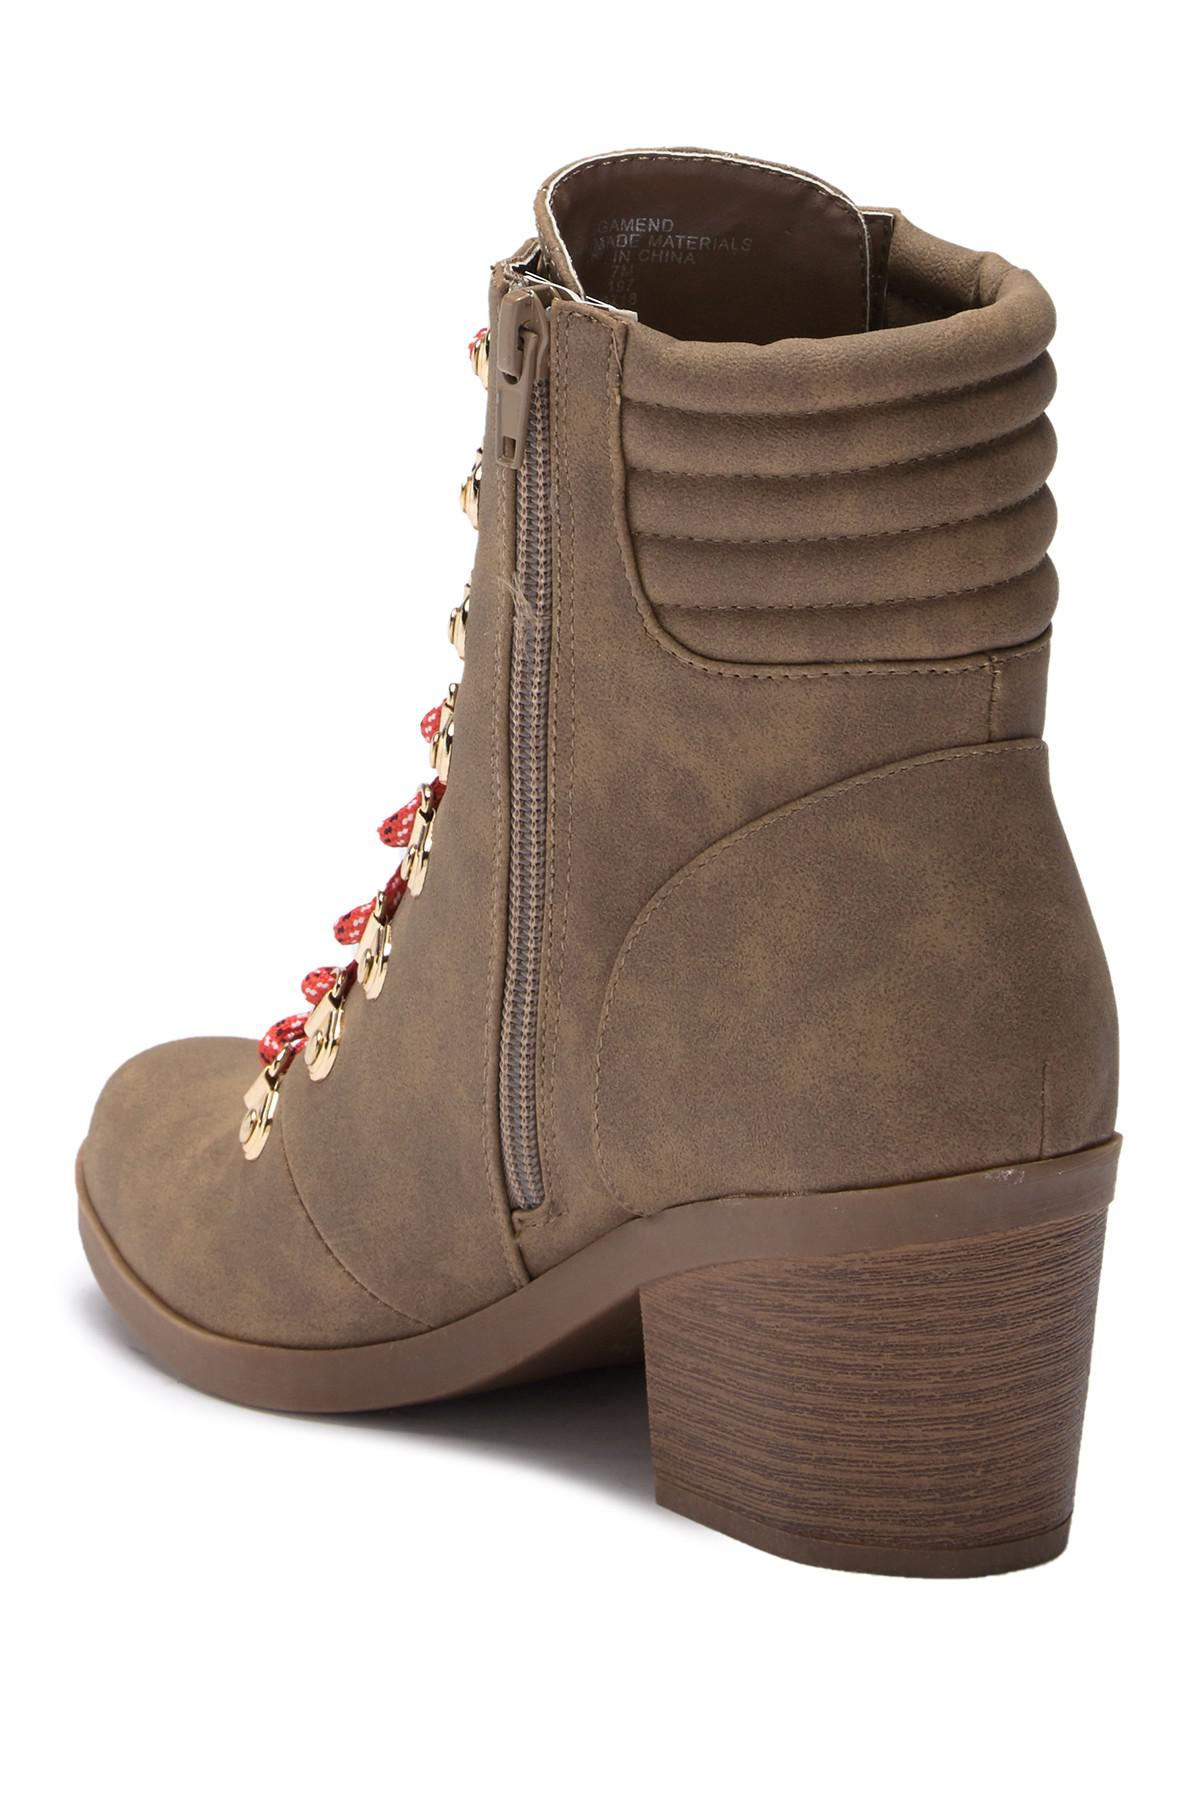 G by Guess Amend Lace-up Bootie in 